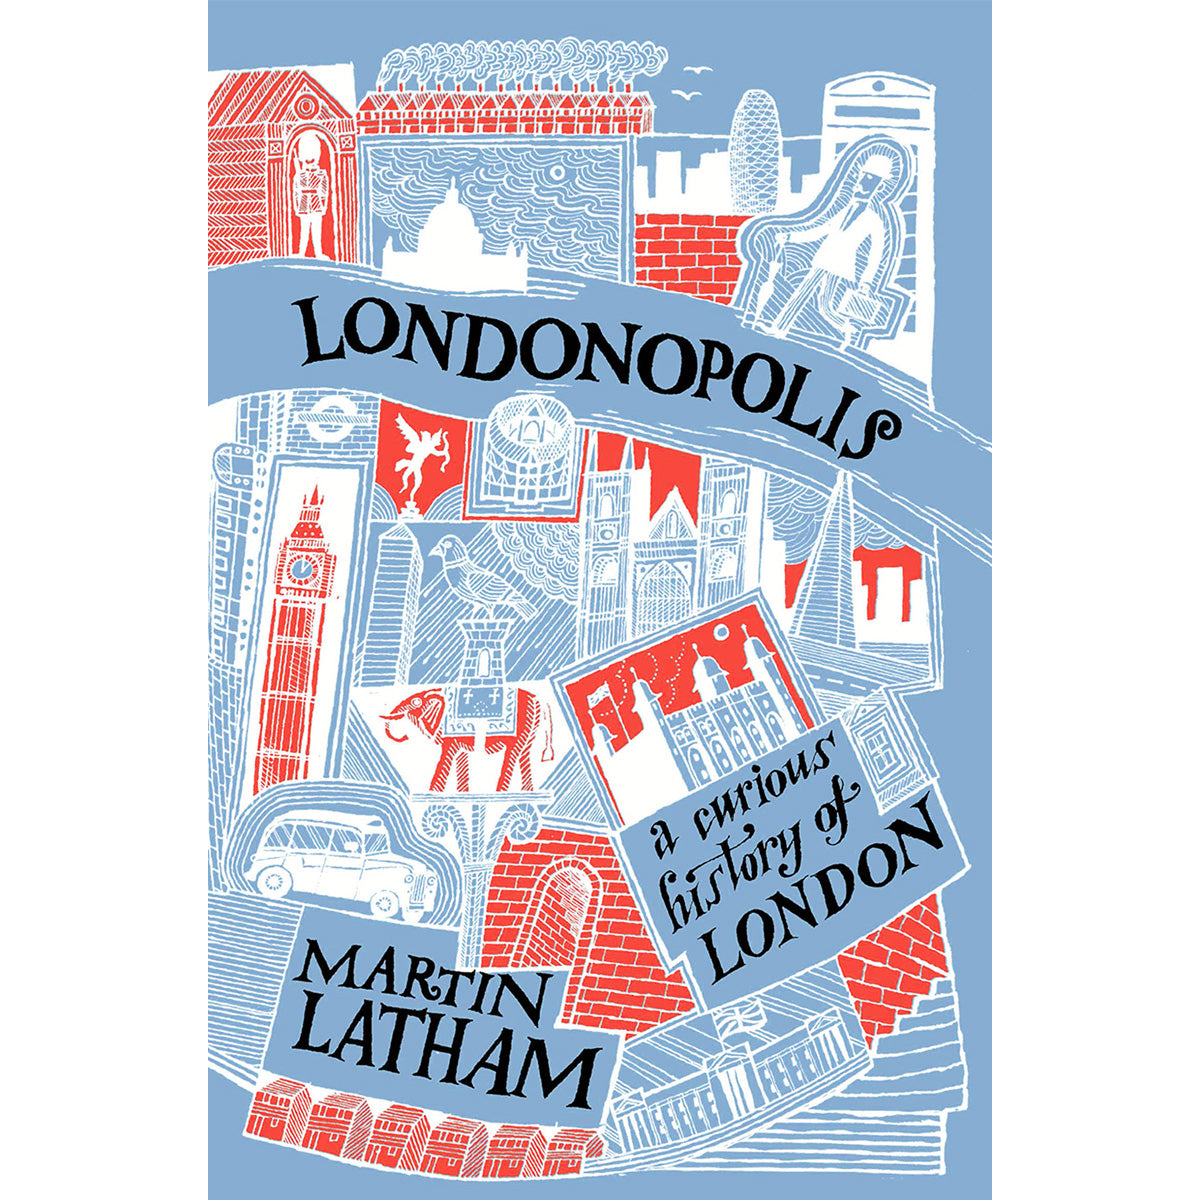 Londonopolis: A Curious History of London Book by Martin Latham 1